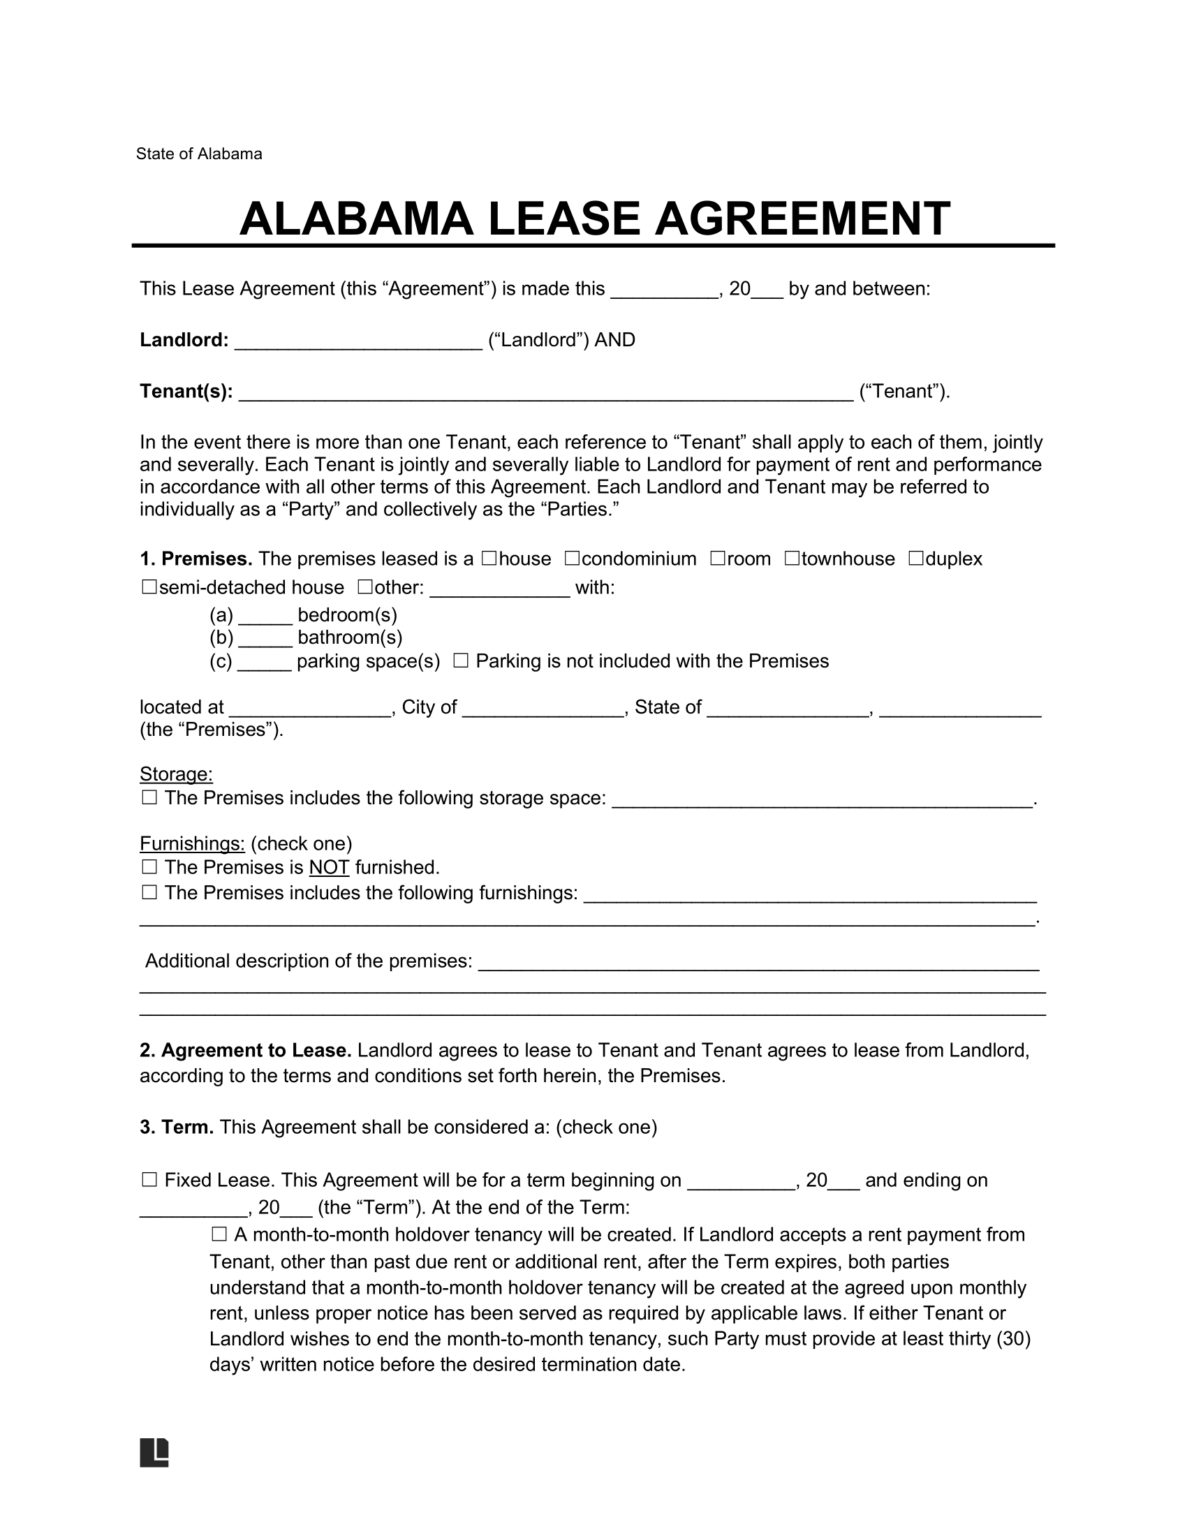 LegalTemplates Alabama Residential Lease Agreement 